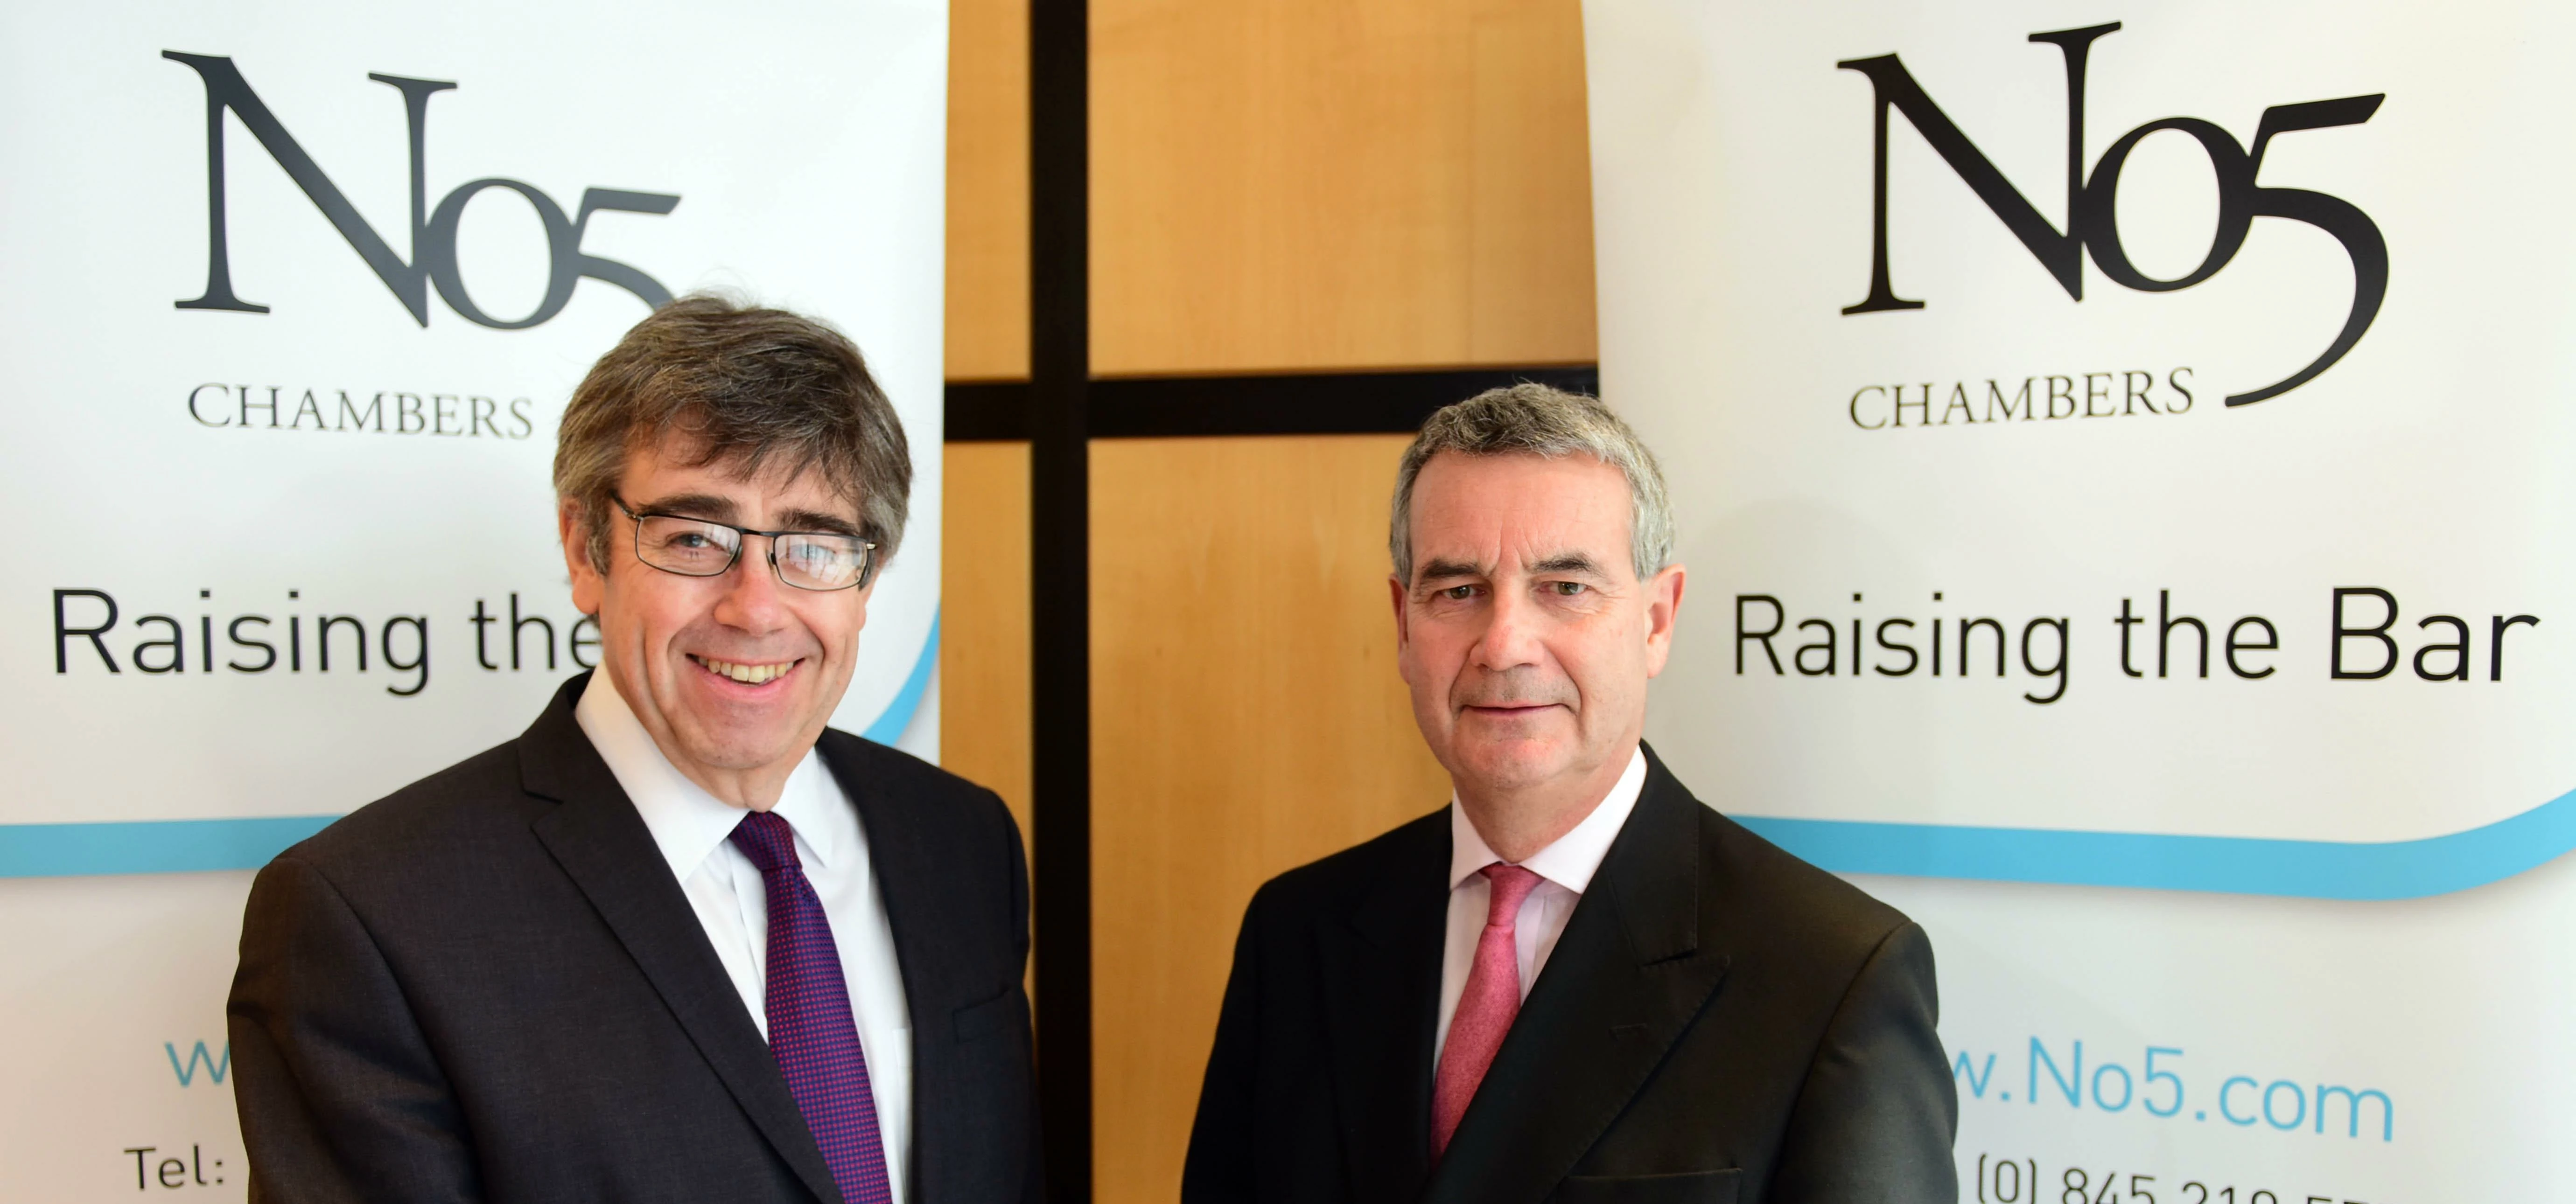 Mark Anderson QC, left, will take over as Head of Chambers at No5 Chambers from Paul Bleasdale QC, r